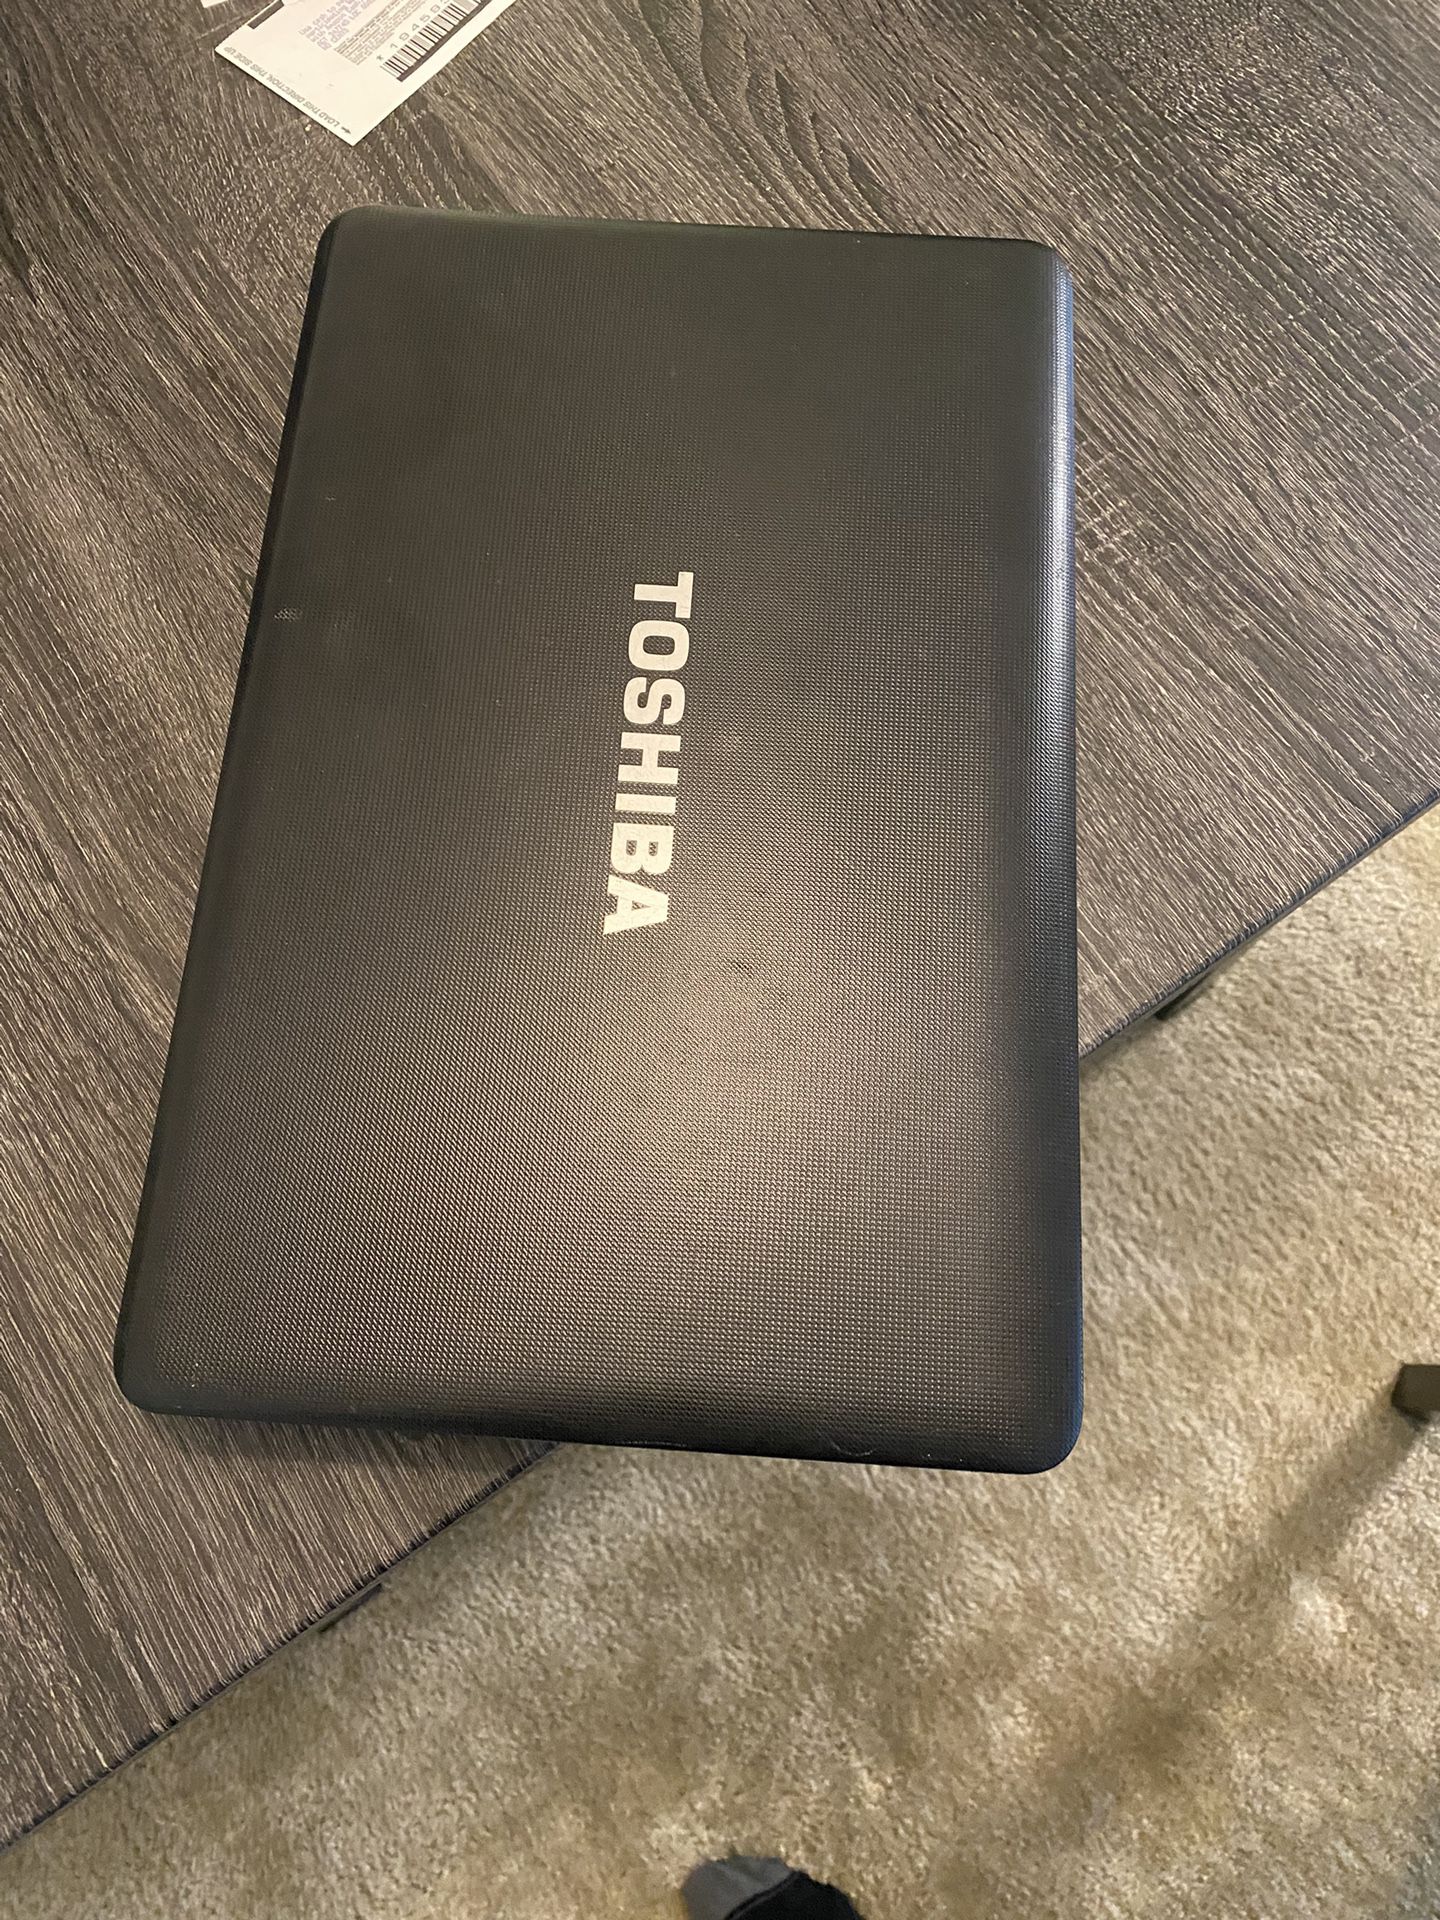 Urgent! Toshiba Laptop For Cheap ( Works Like New)